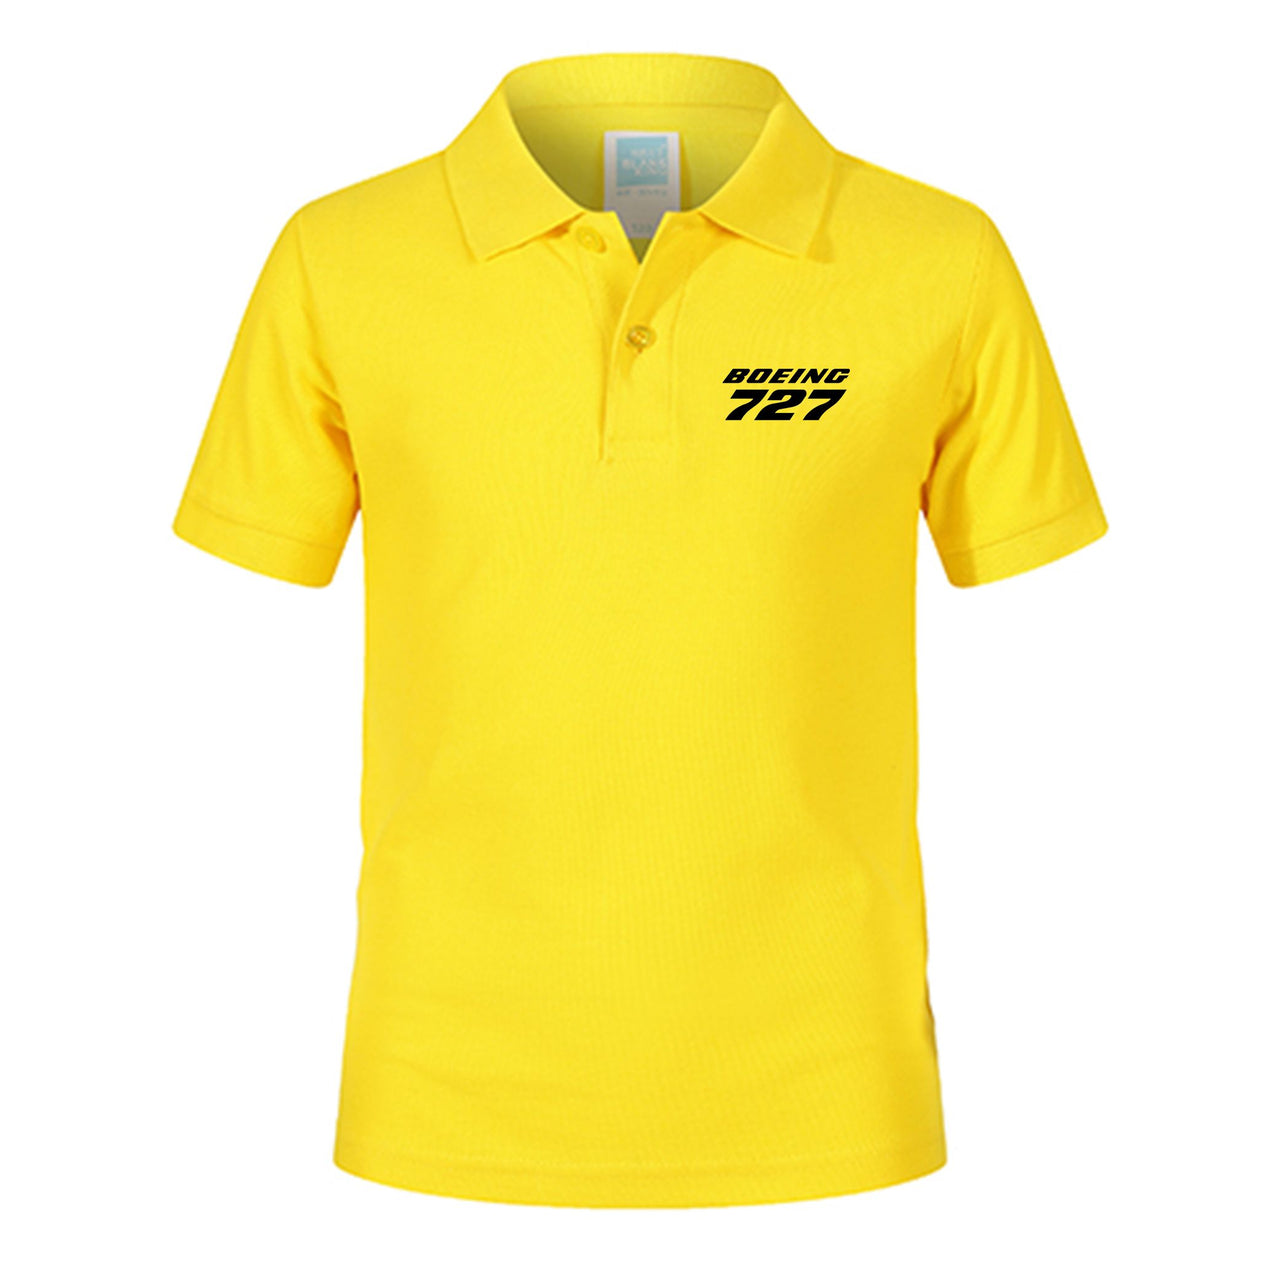 Boeing 727 & Text Designed Children Polo T-Shirts